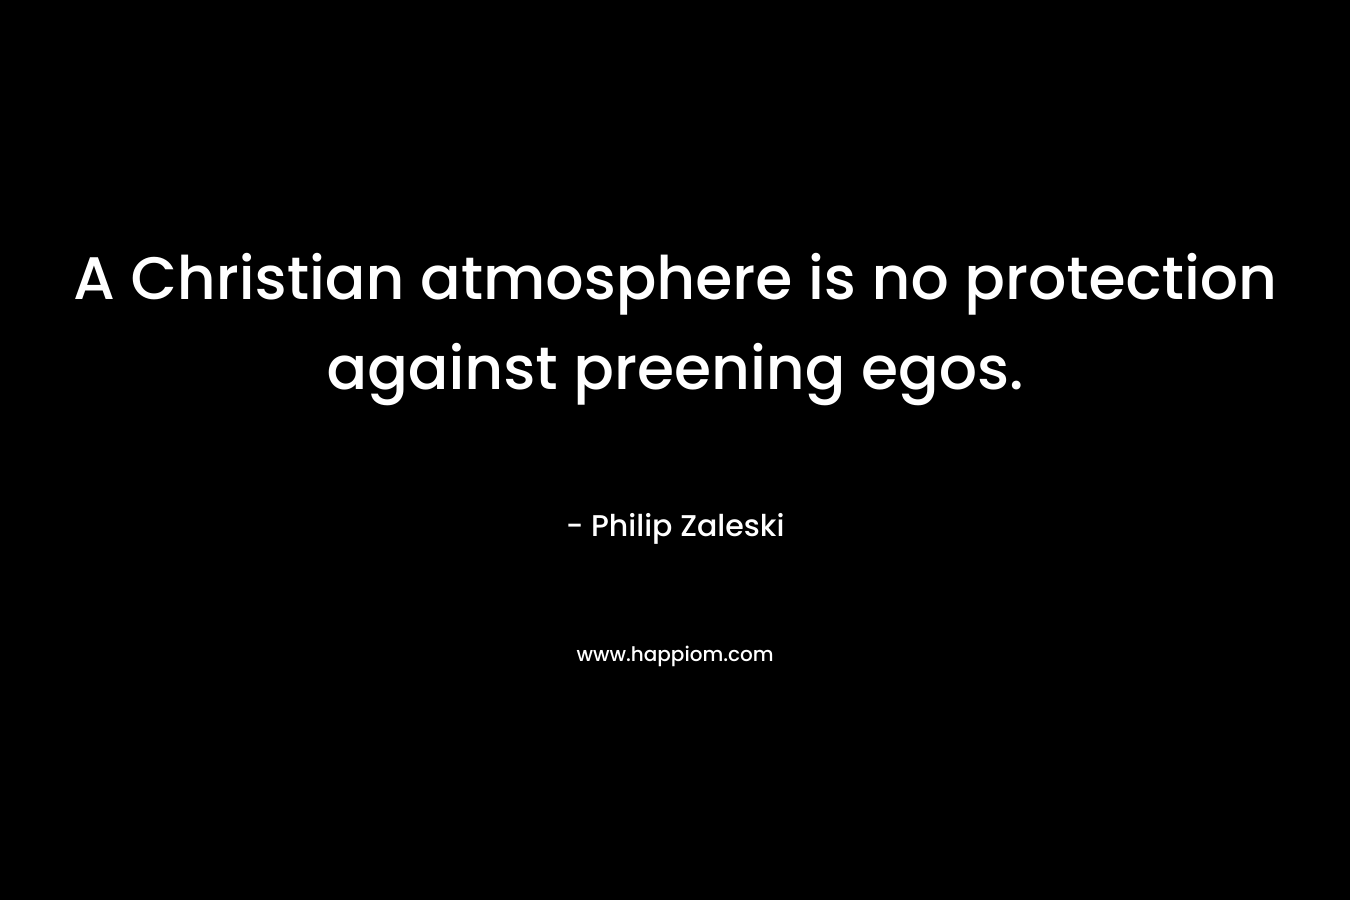 A Christian atmosphere is no protection against preening egos. – Philip Zaleski